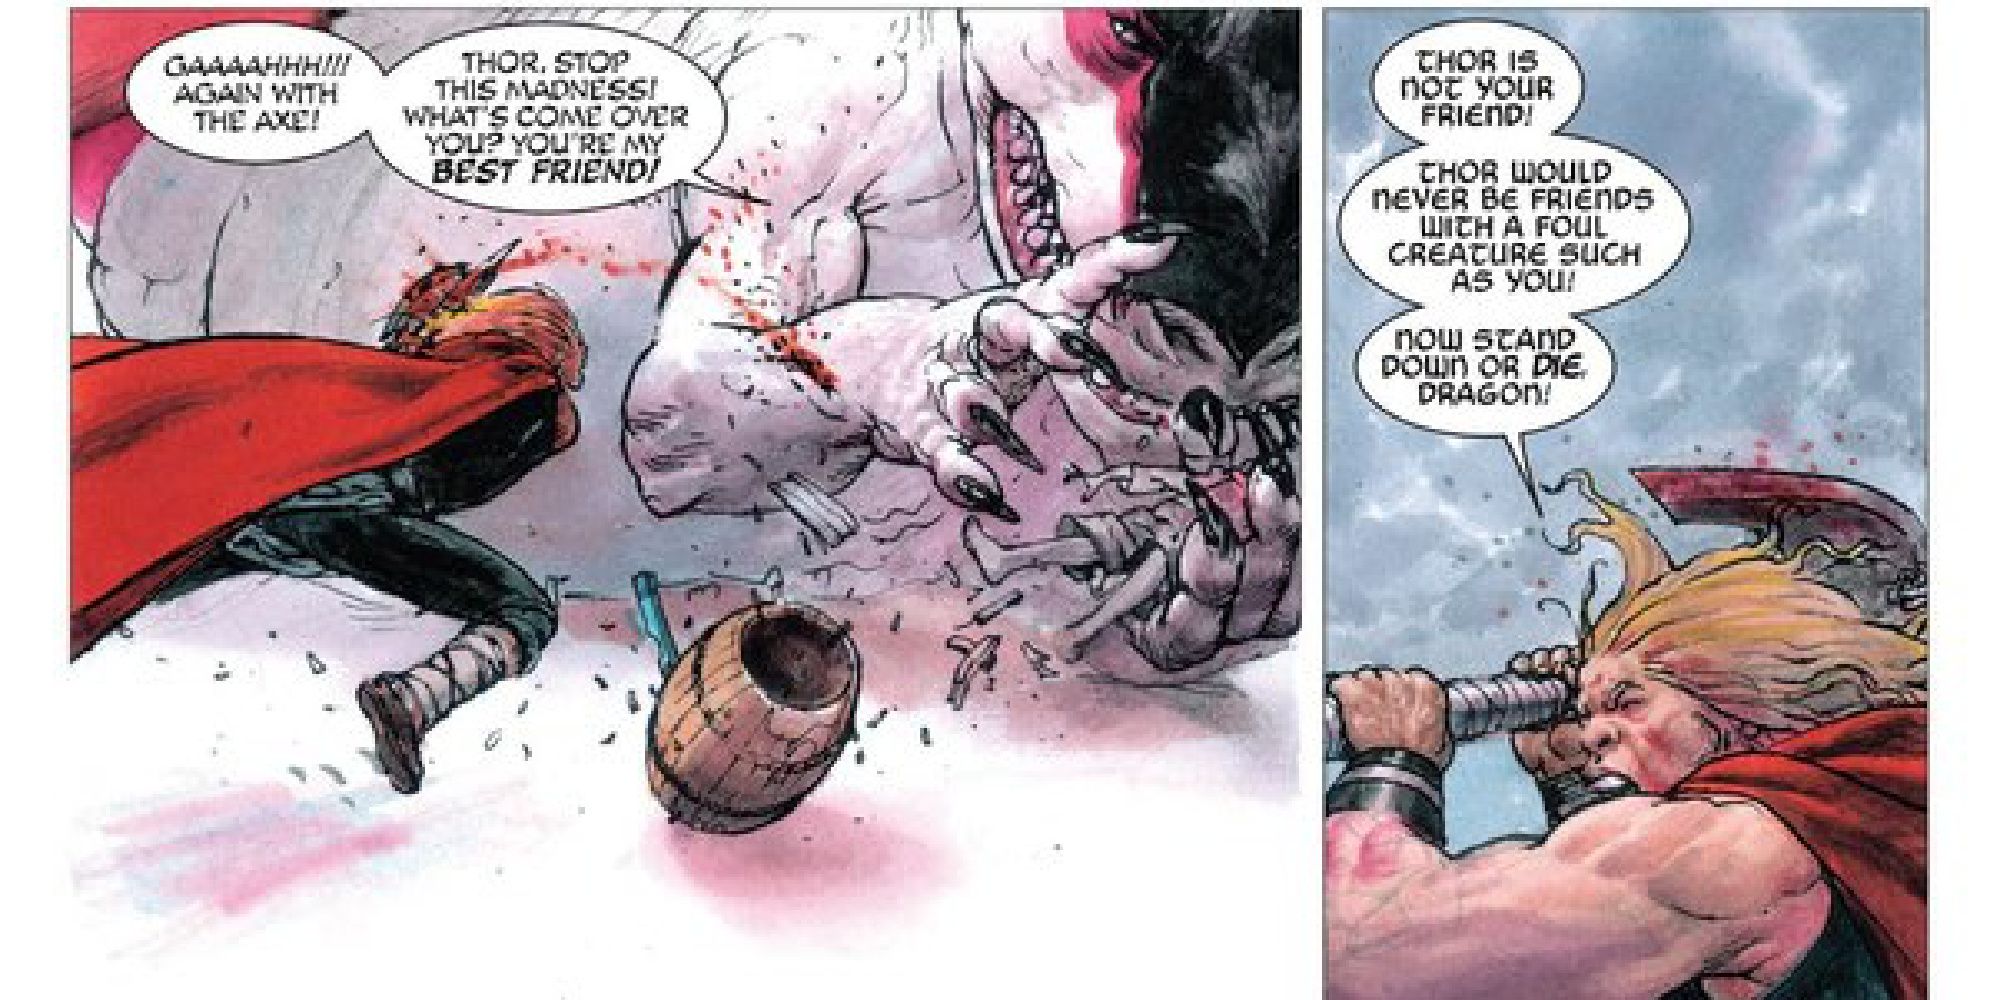 Thor and Skagbagg fight in the comics